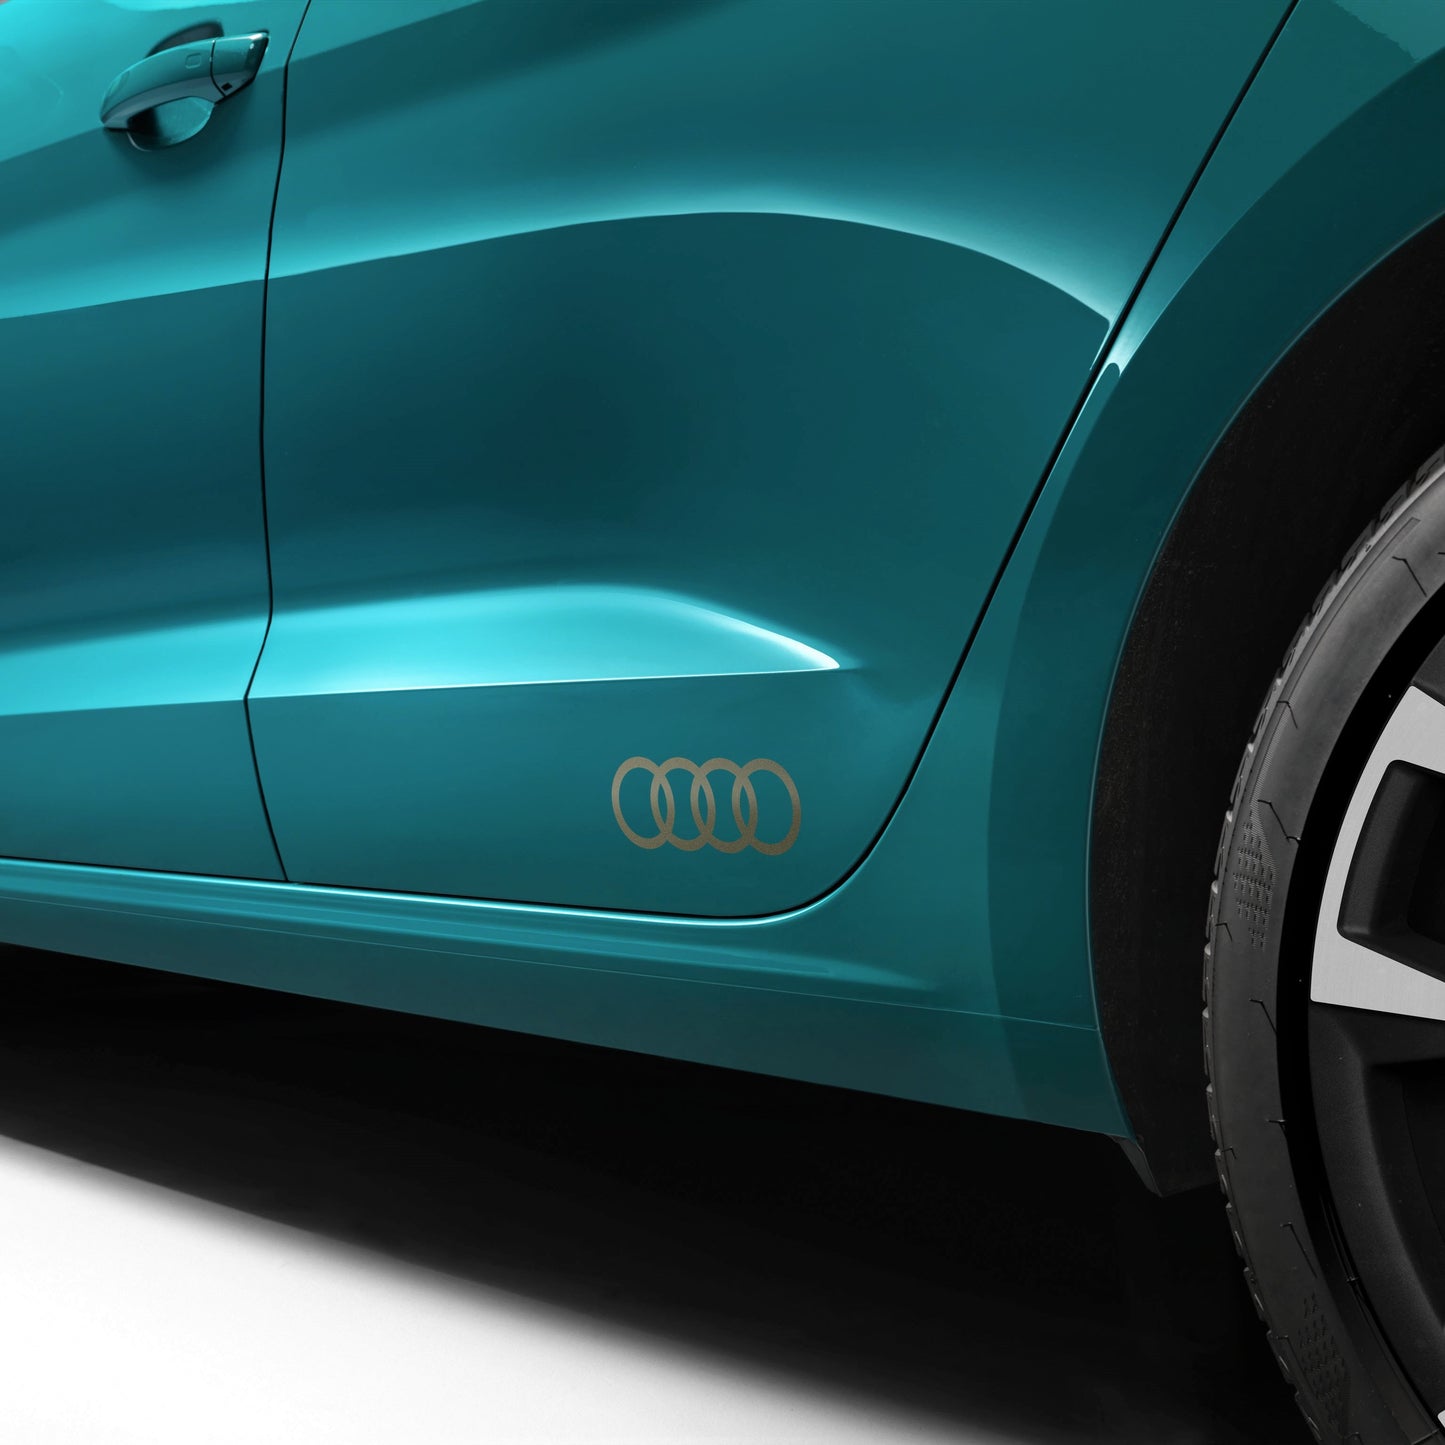 Audi rings decals. Silver